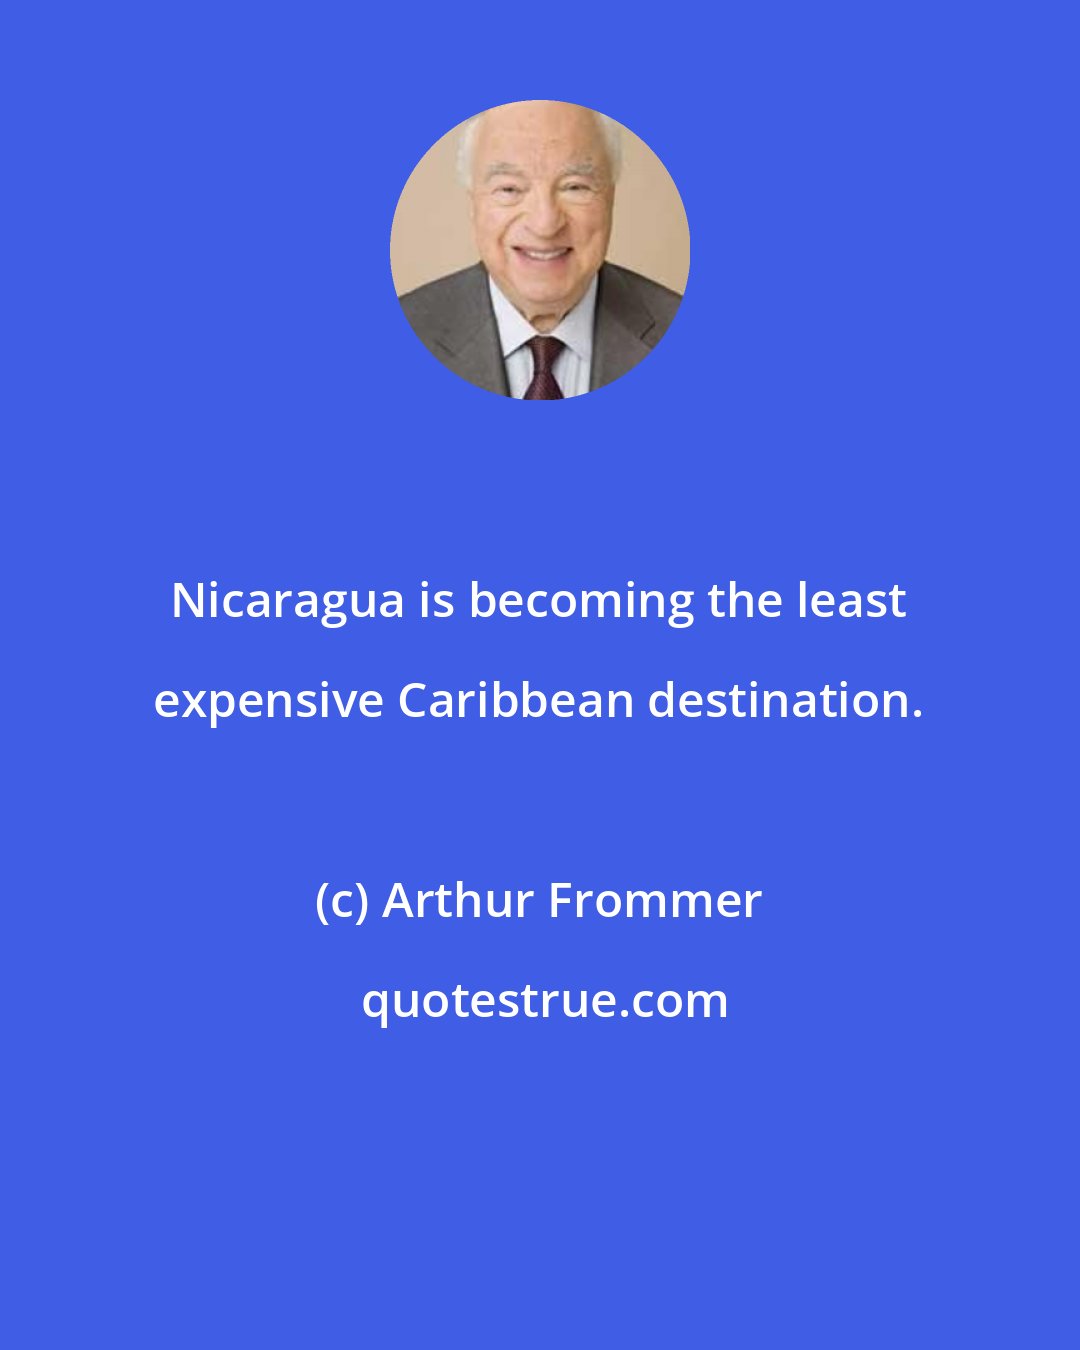 Arthur Frommer: Nicaragua is becoming the least expensive Caribbean destination.